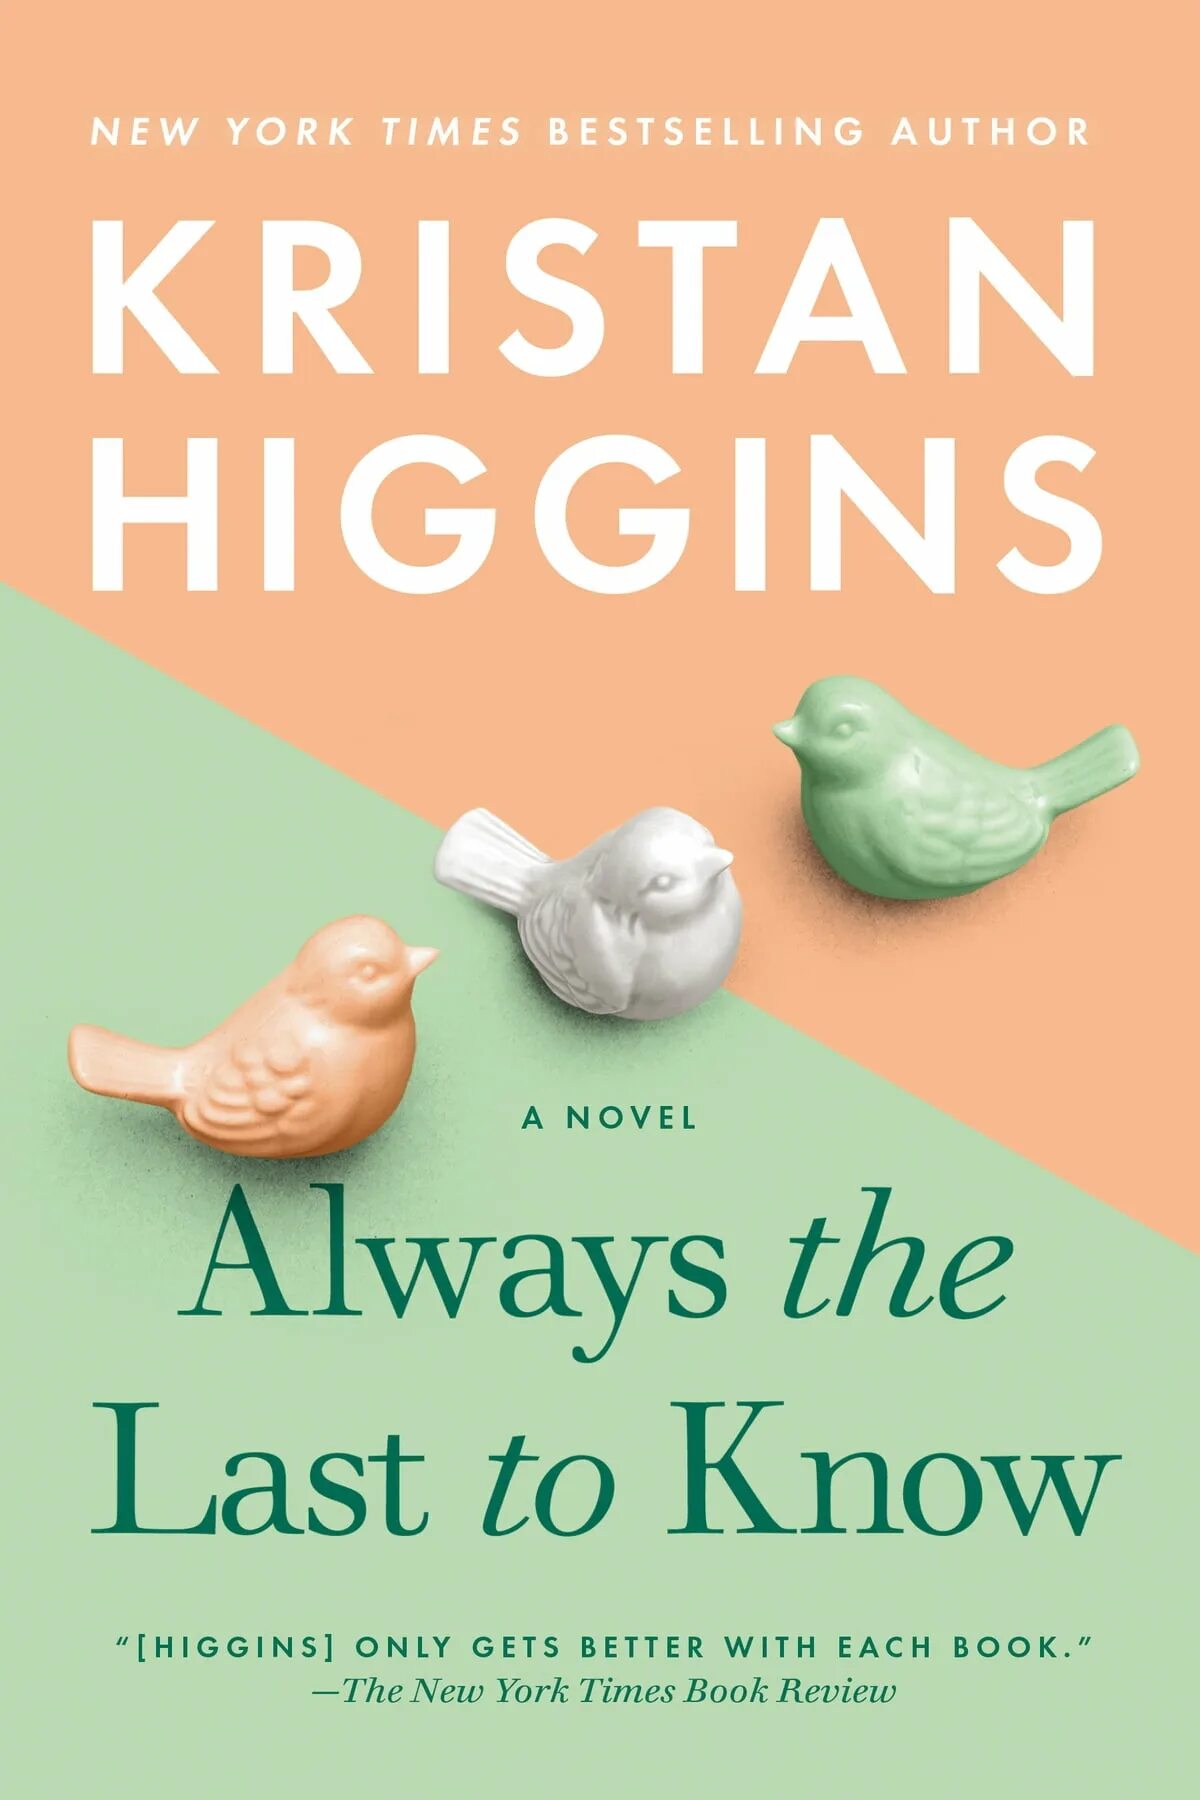 She knows this book. Always the last to know book by Kristan Higgins. Kristan Higgins книги на русском.